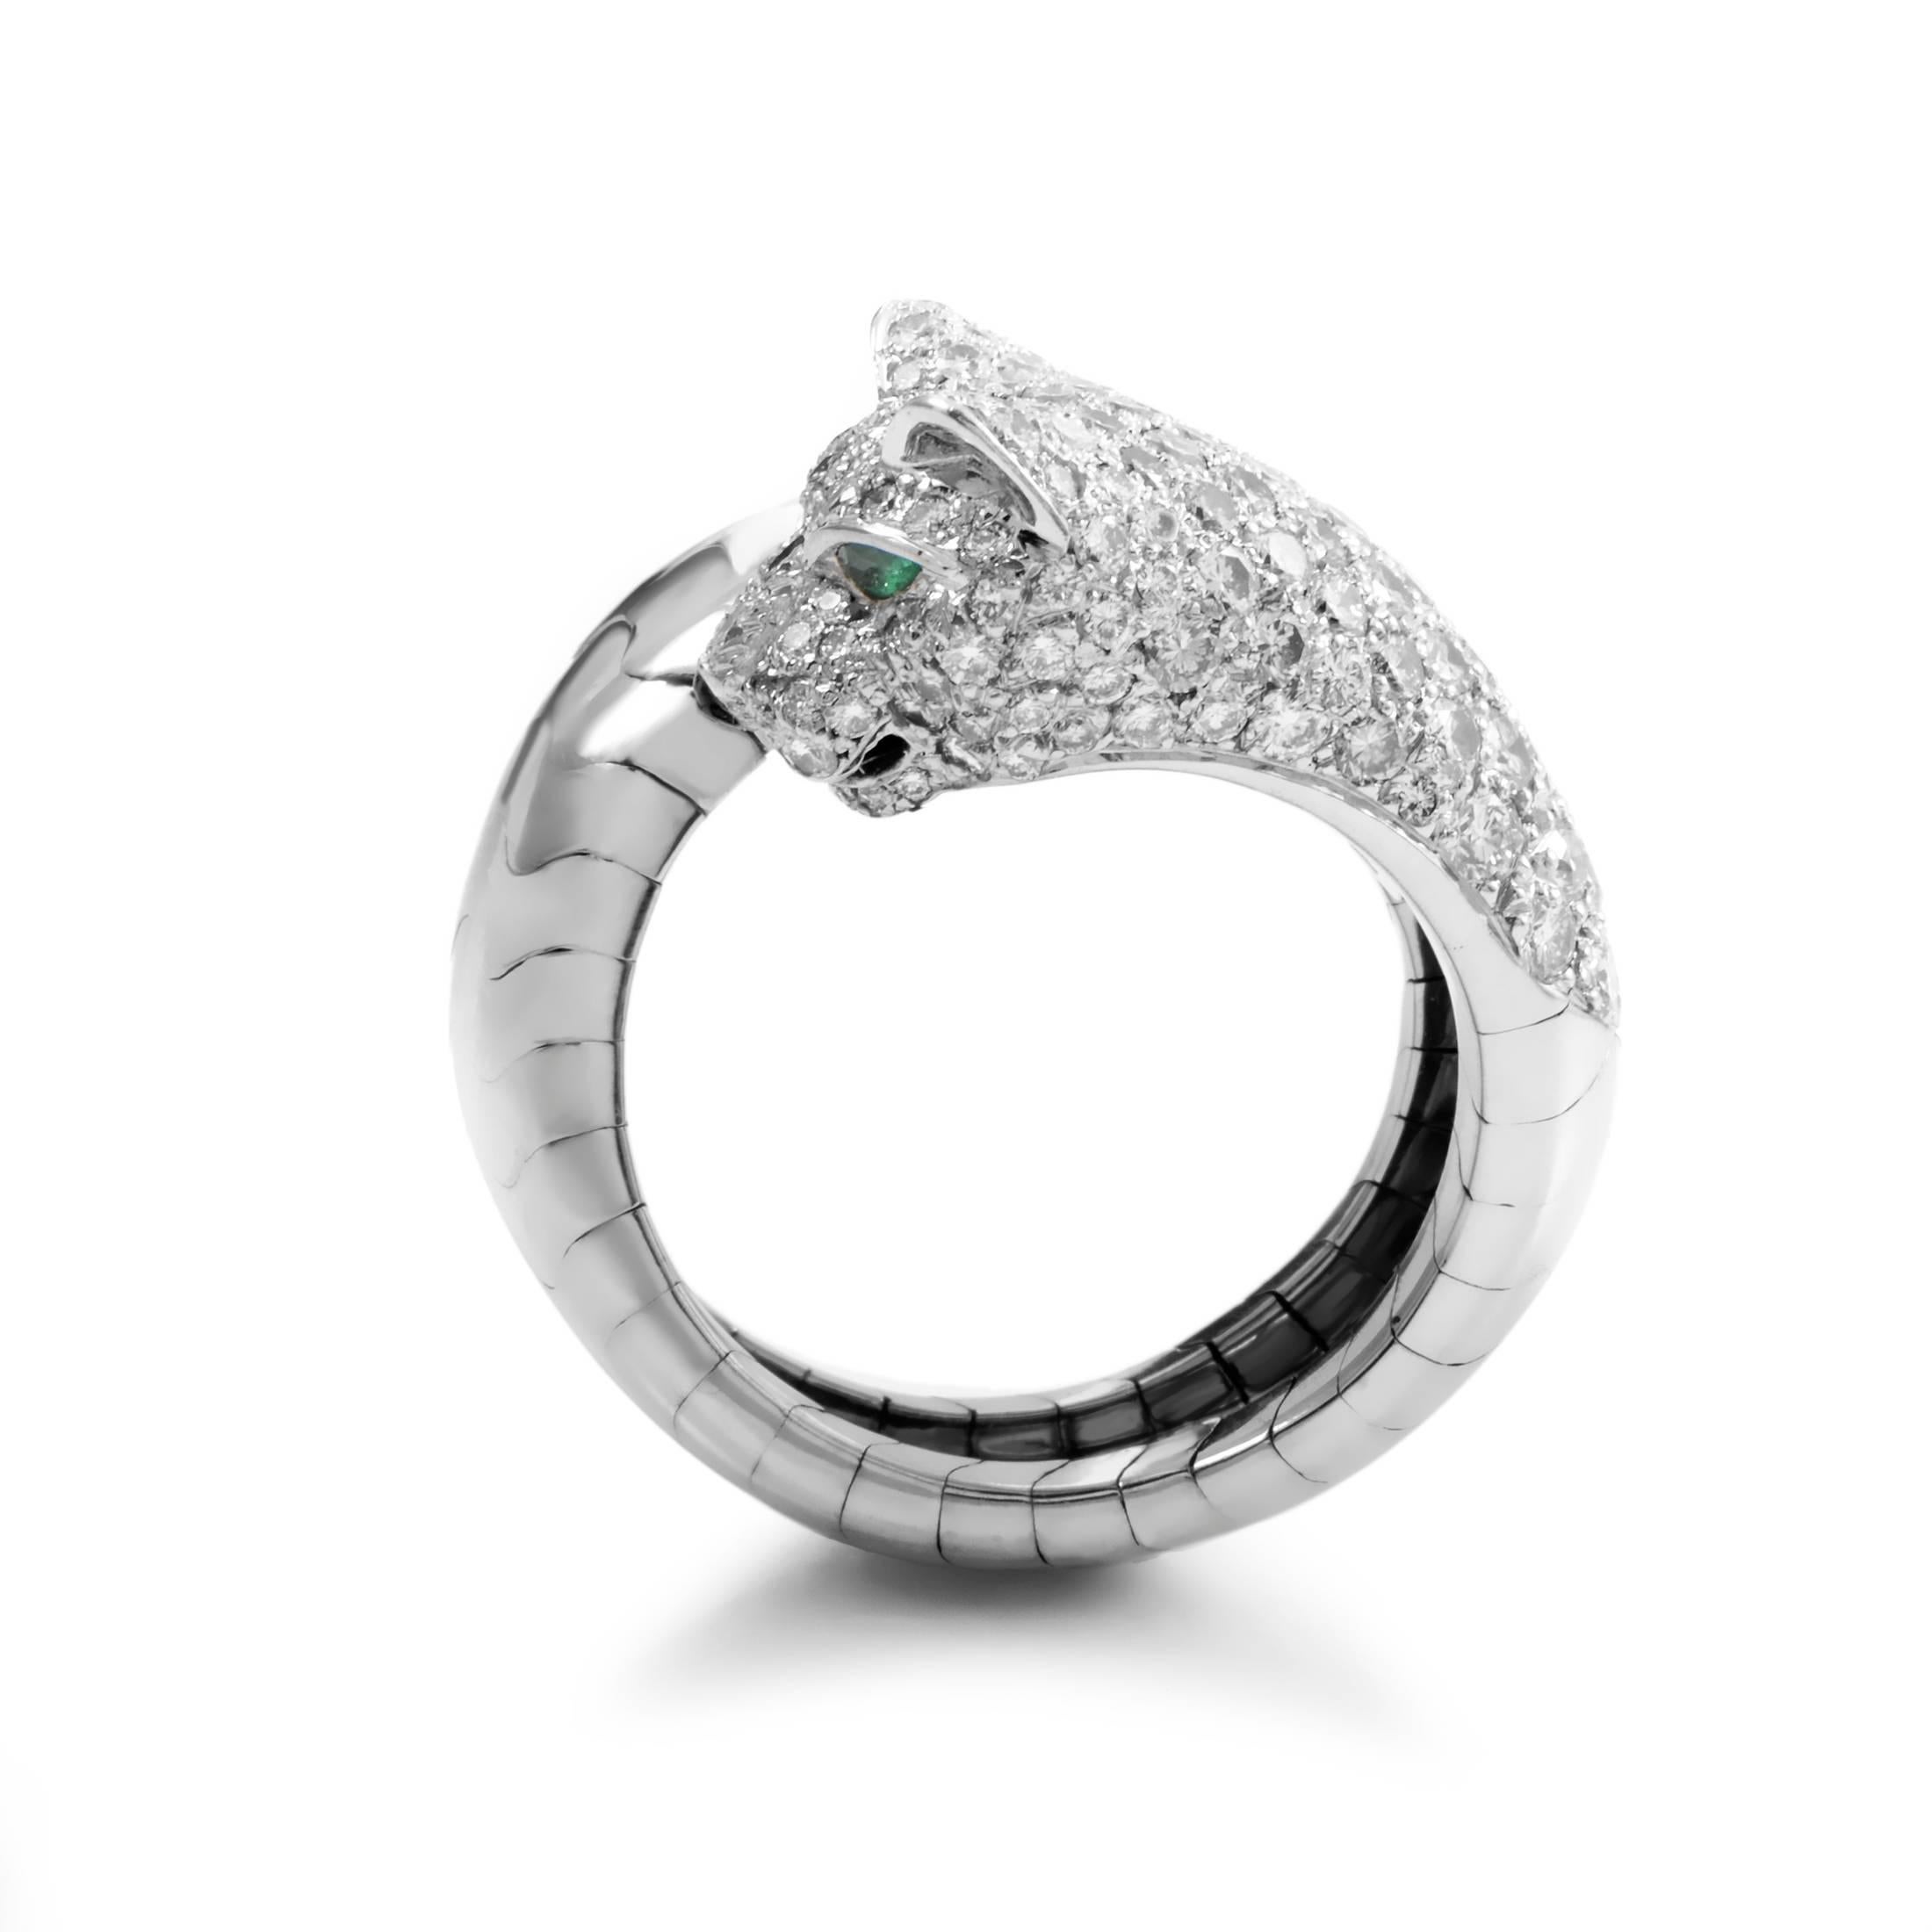 Cartier's Panthere collection is by far one of their most prominent and most beloved to date. This outstanding ring from the collection is made of 18K white gold and features a panther's head in the design. The panther is paved with white diamond